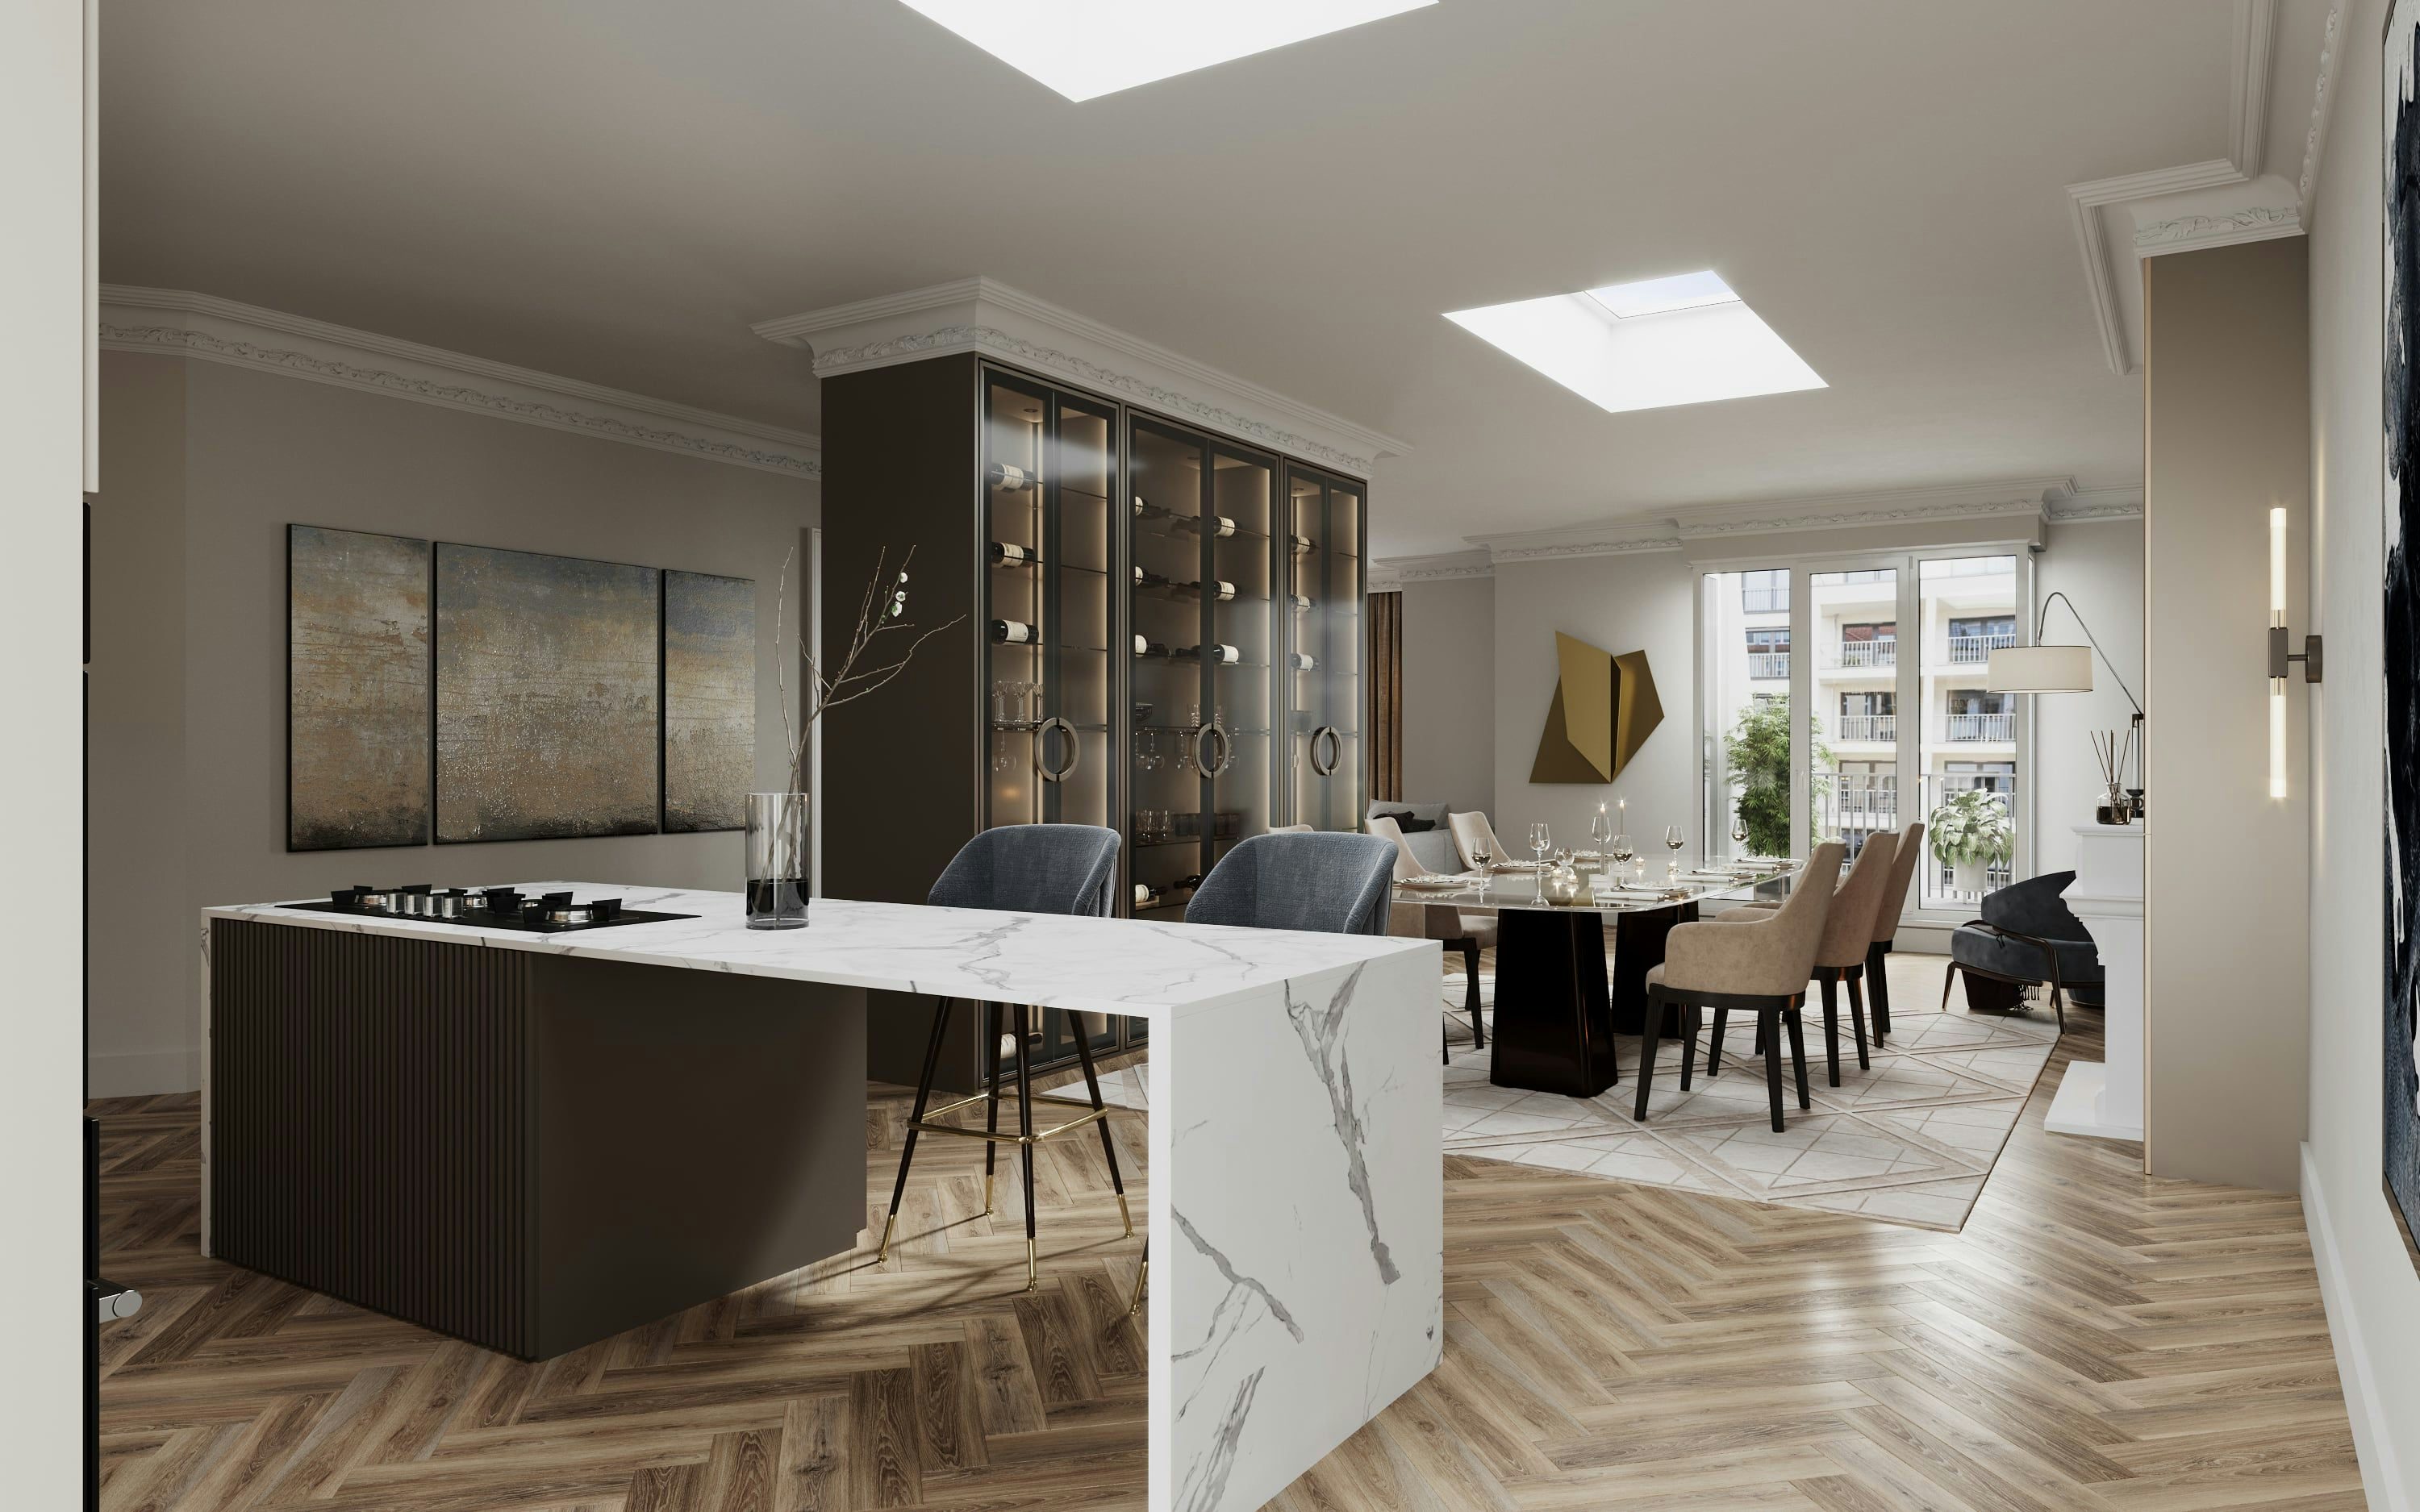 3D architectural Visualization of open space kitchen with dining room in renovated old building apartment, Hamburg Germany